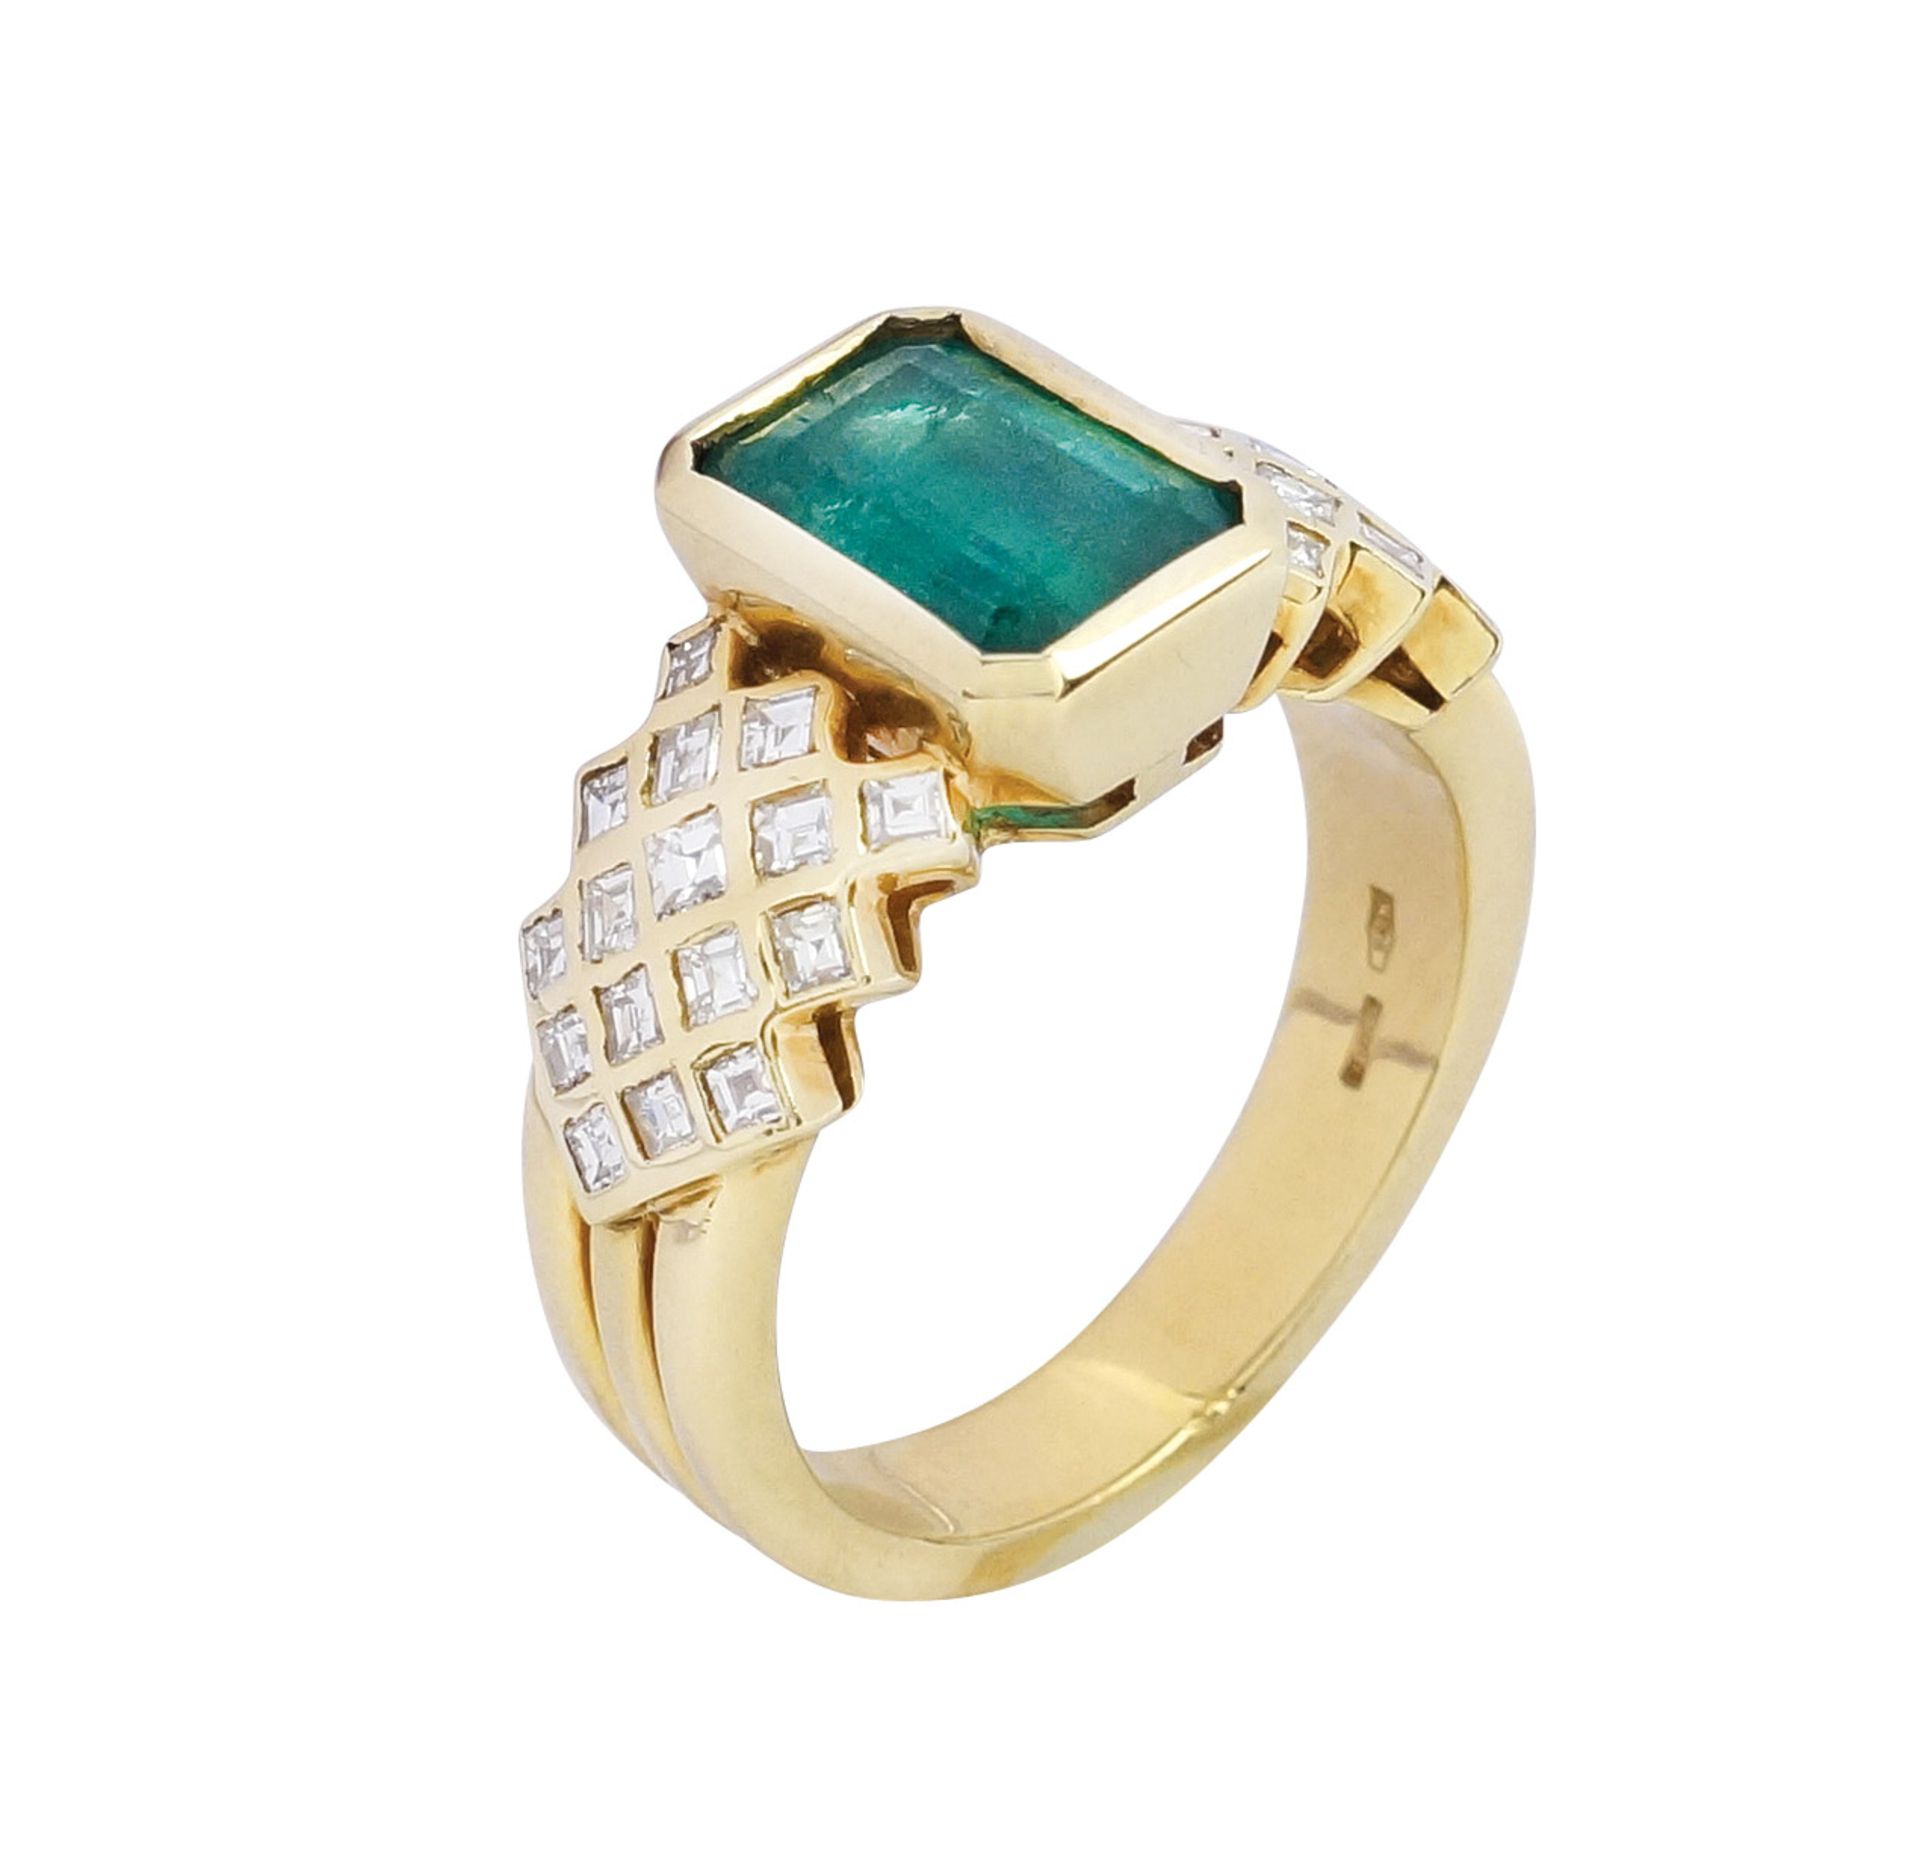 An 18k gold, emerald and diamond ring